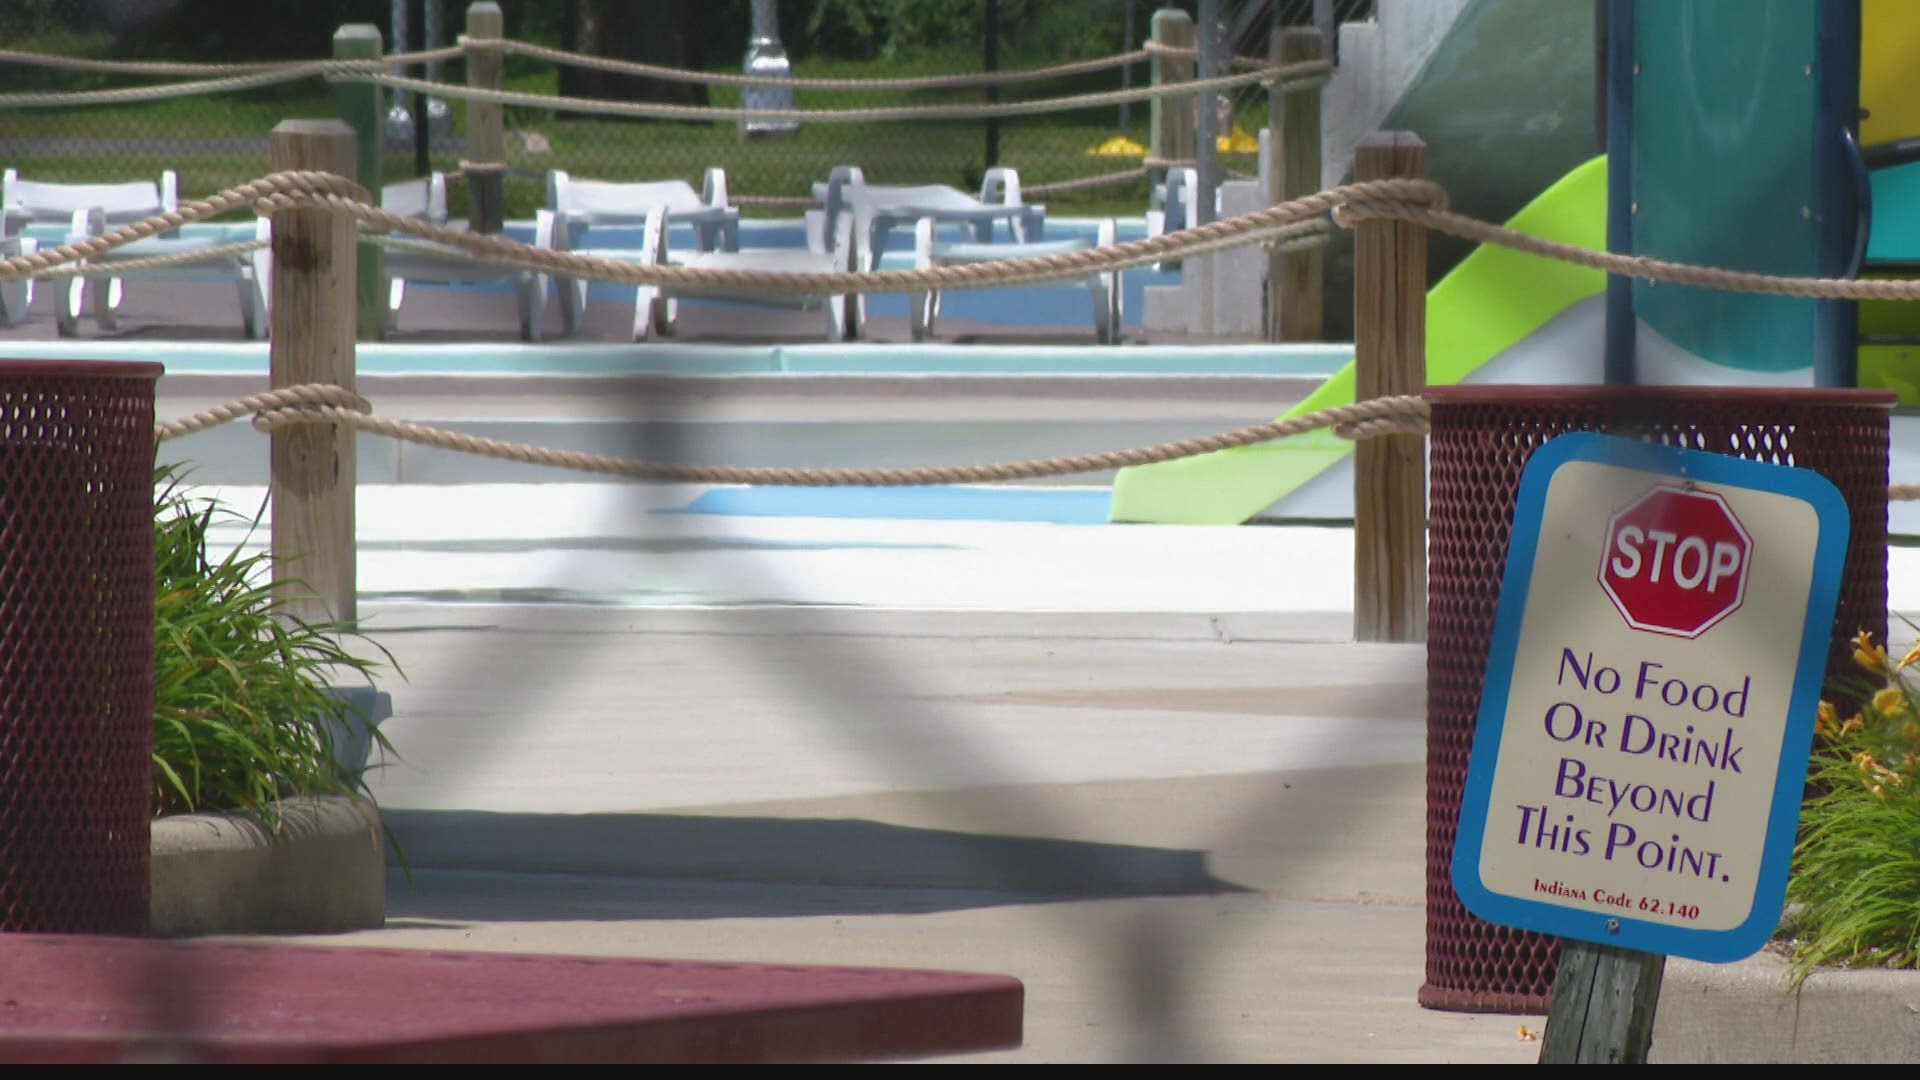 We now know what sparked a shooting at a Kokomo water park that sent about 700 people running for safety and one teen wounded.